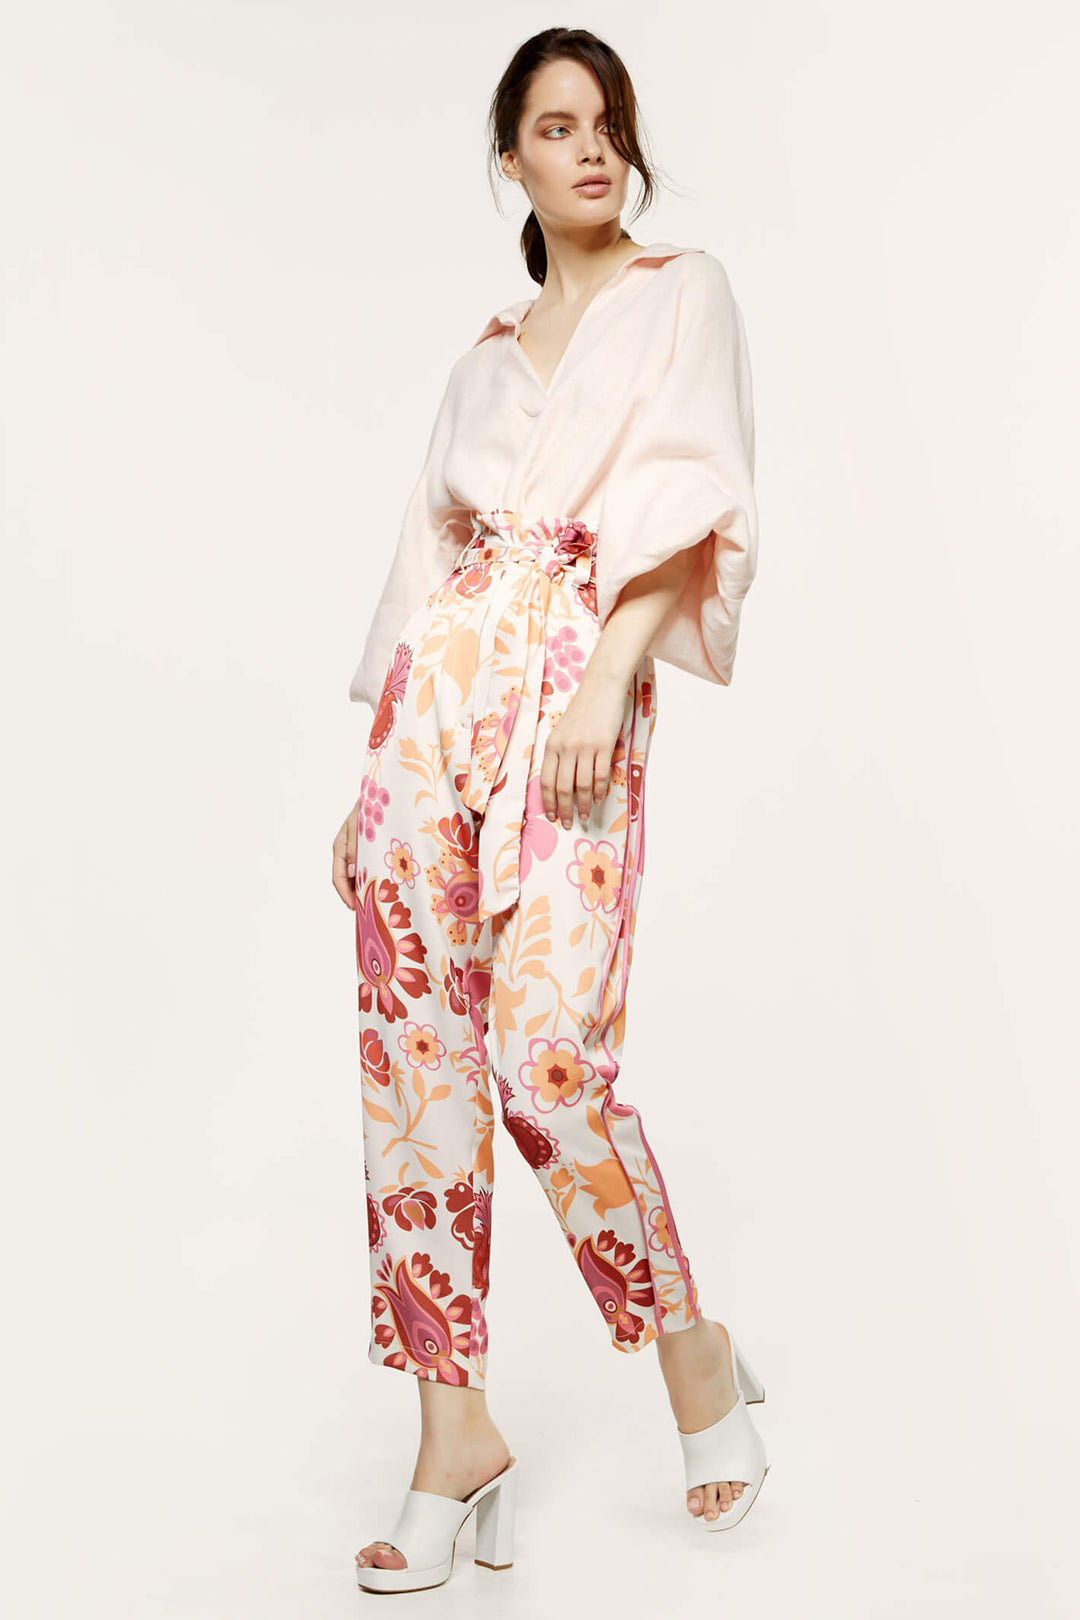 Access Fashion 5142 Vanilla Floral Trousers - Experience Boutique